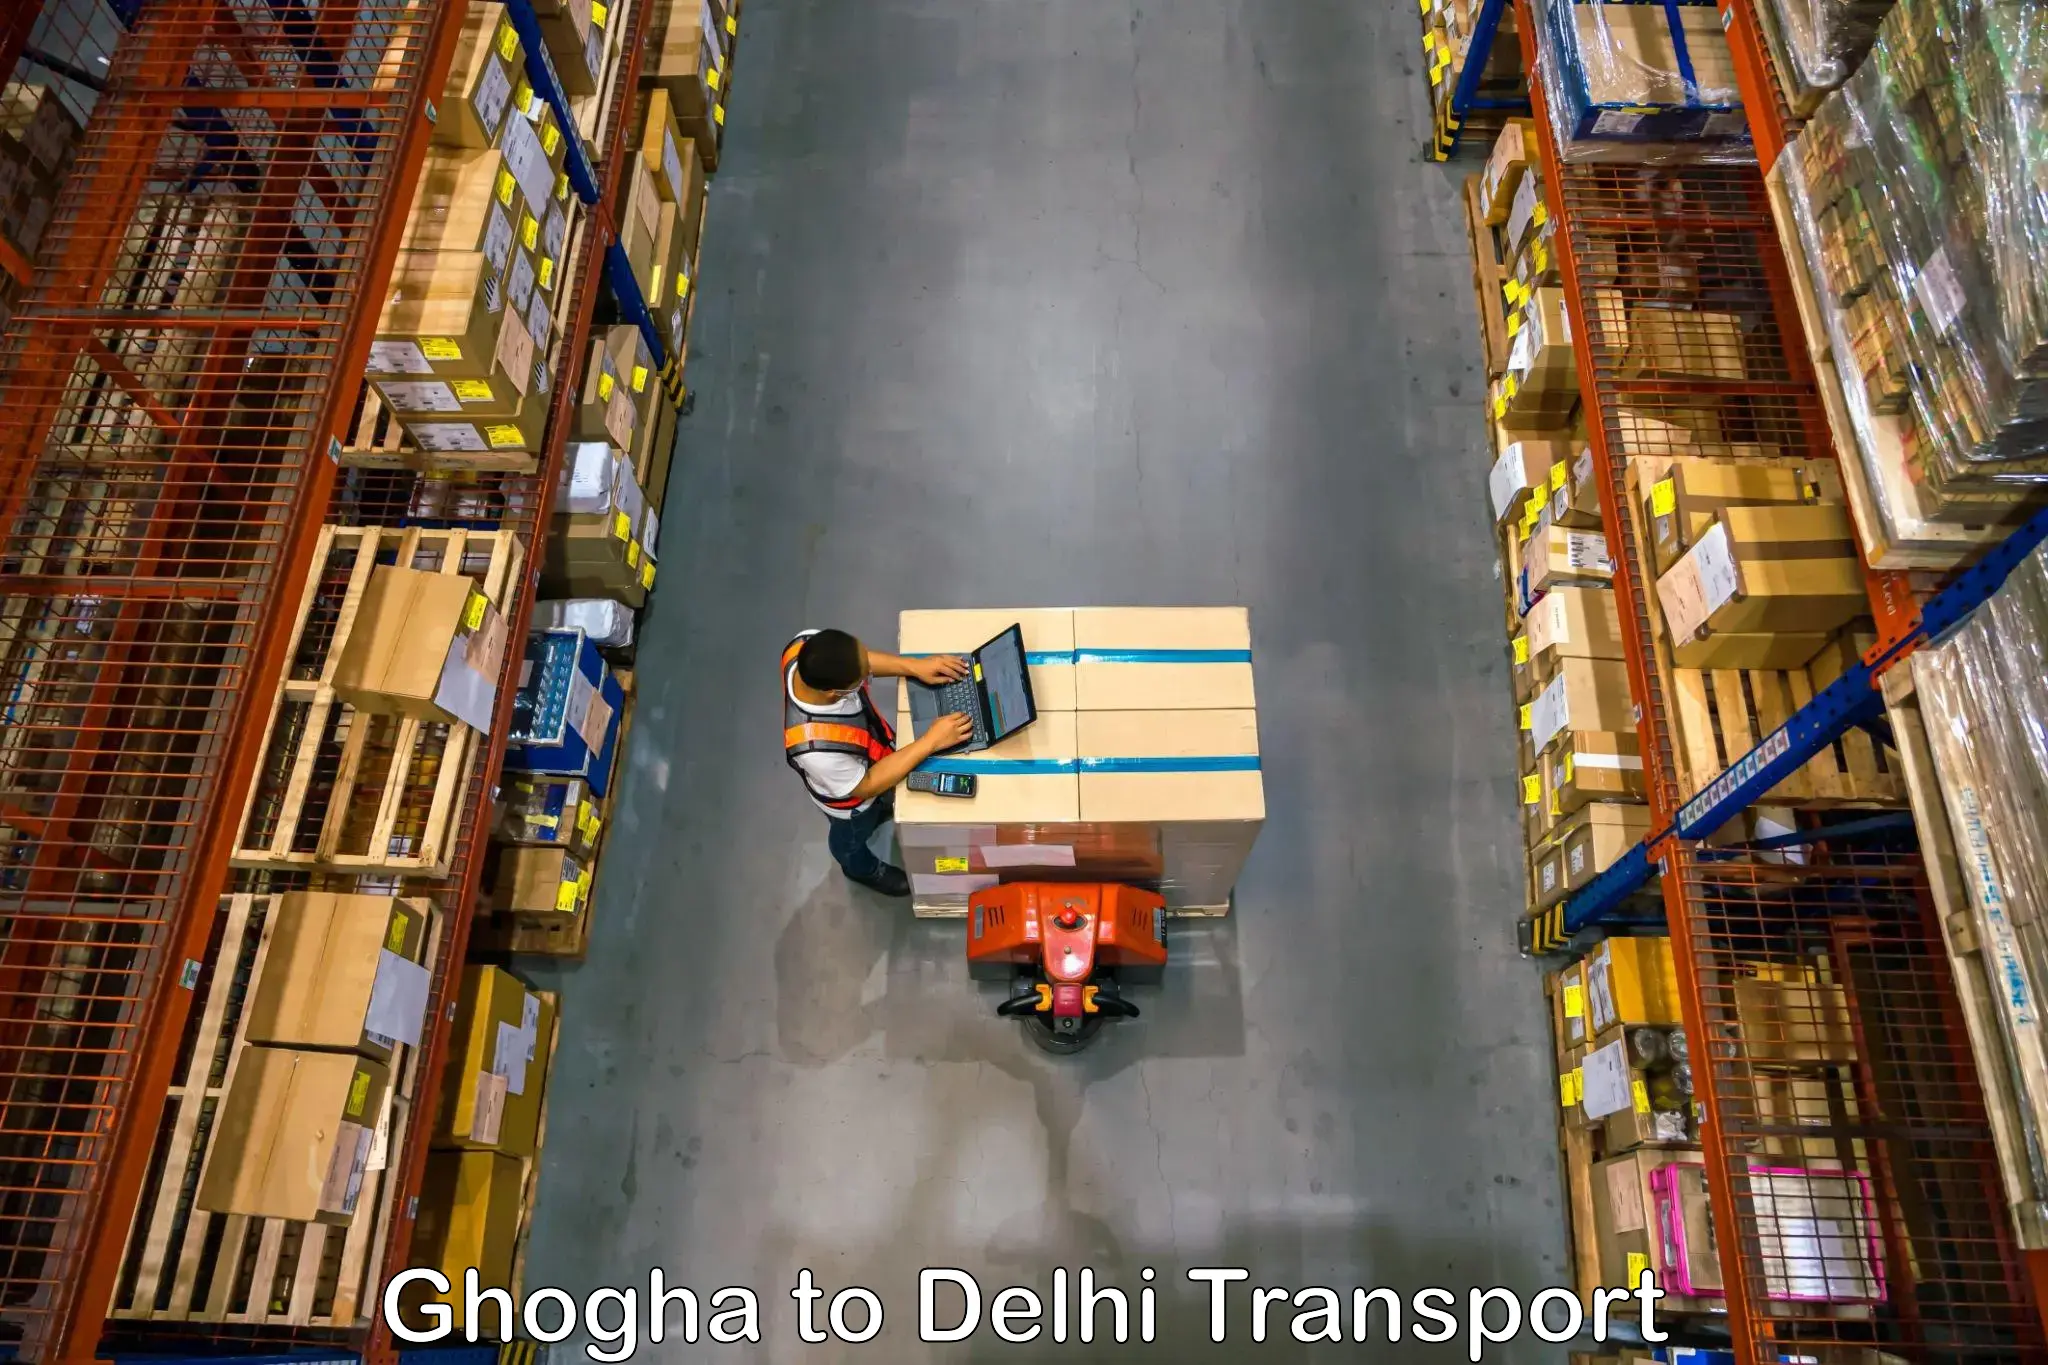 Commercial transport service Ghogha to East Delhi